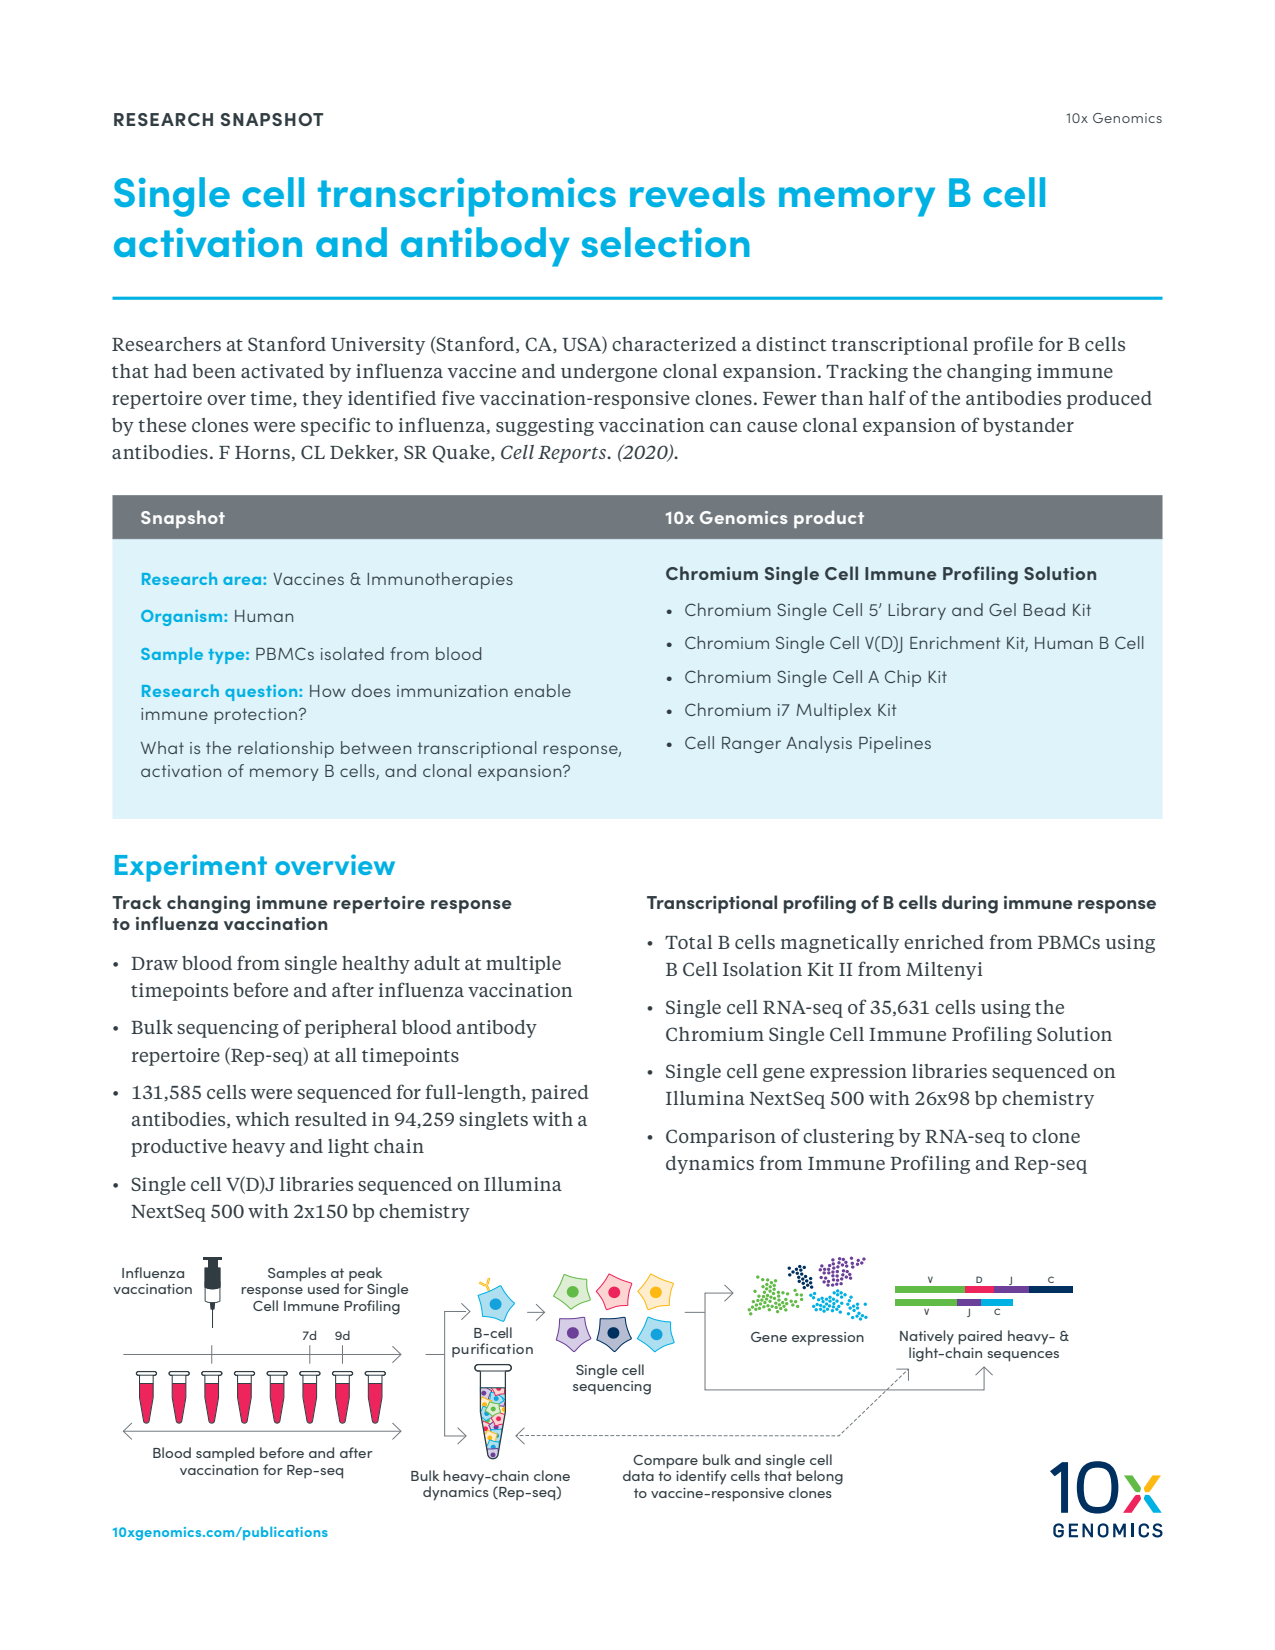 Single cell transcriptomics reveals memory B cell activation and antibody selection